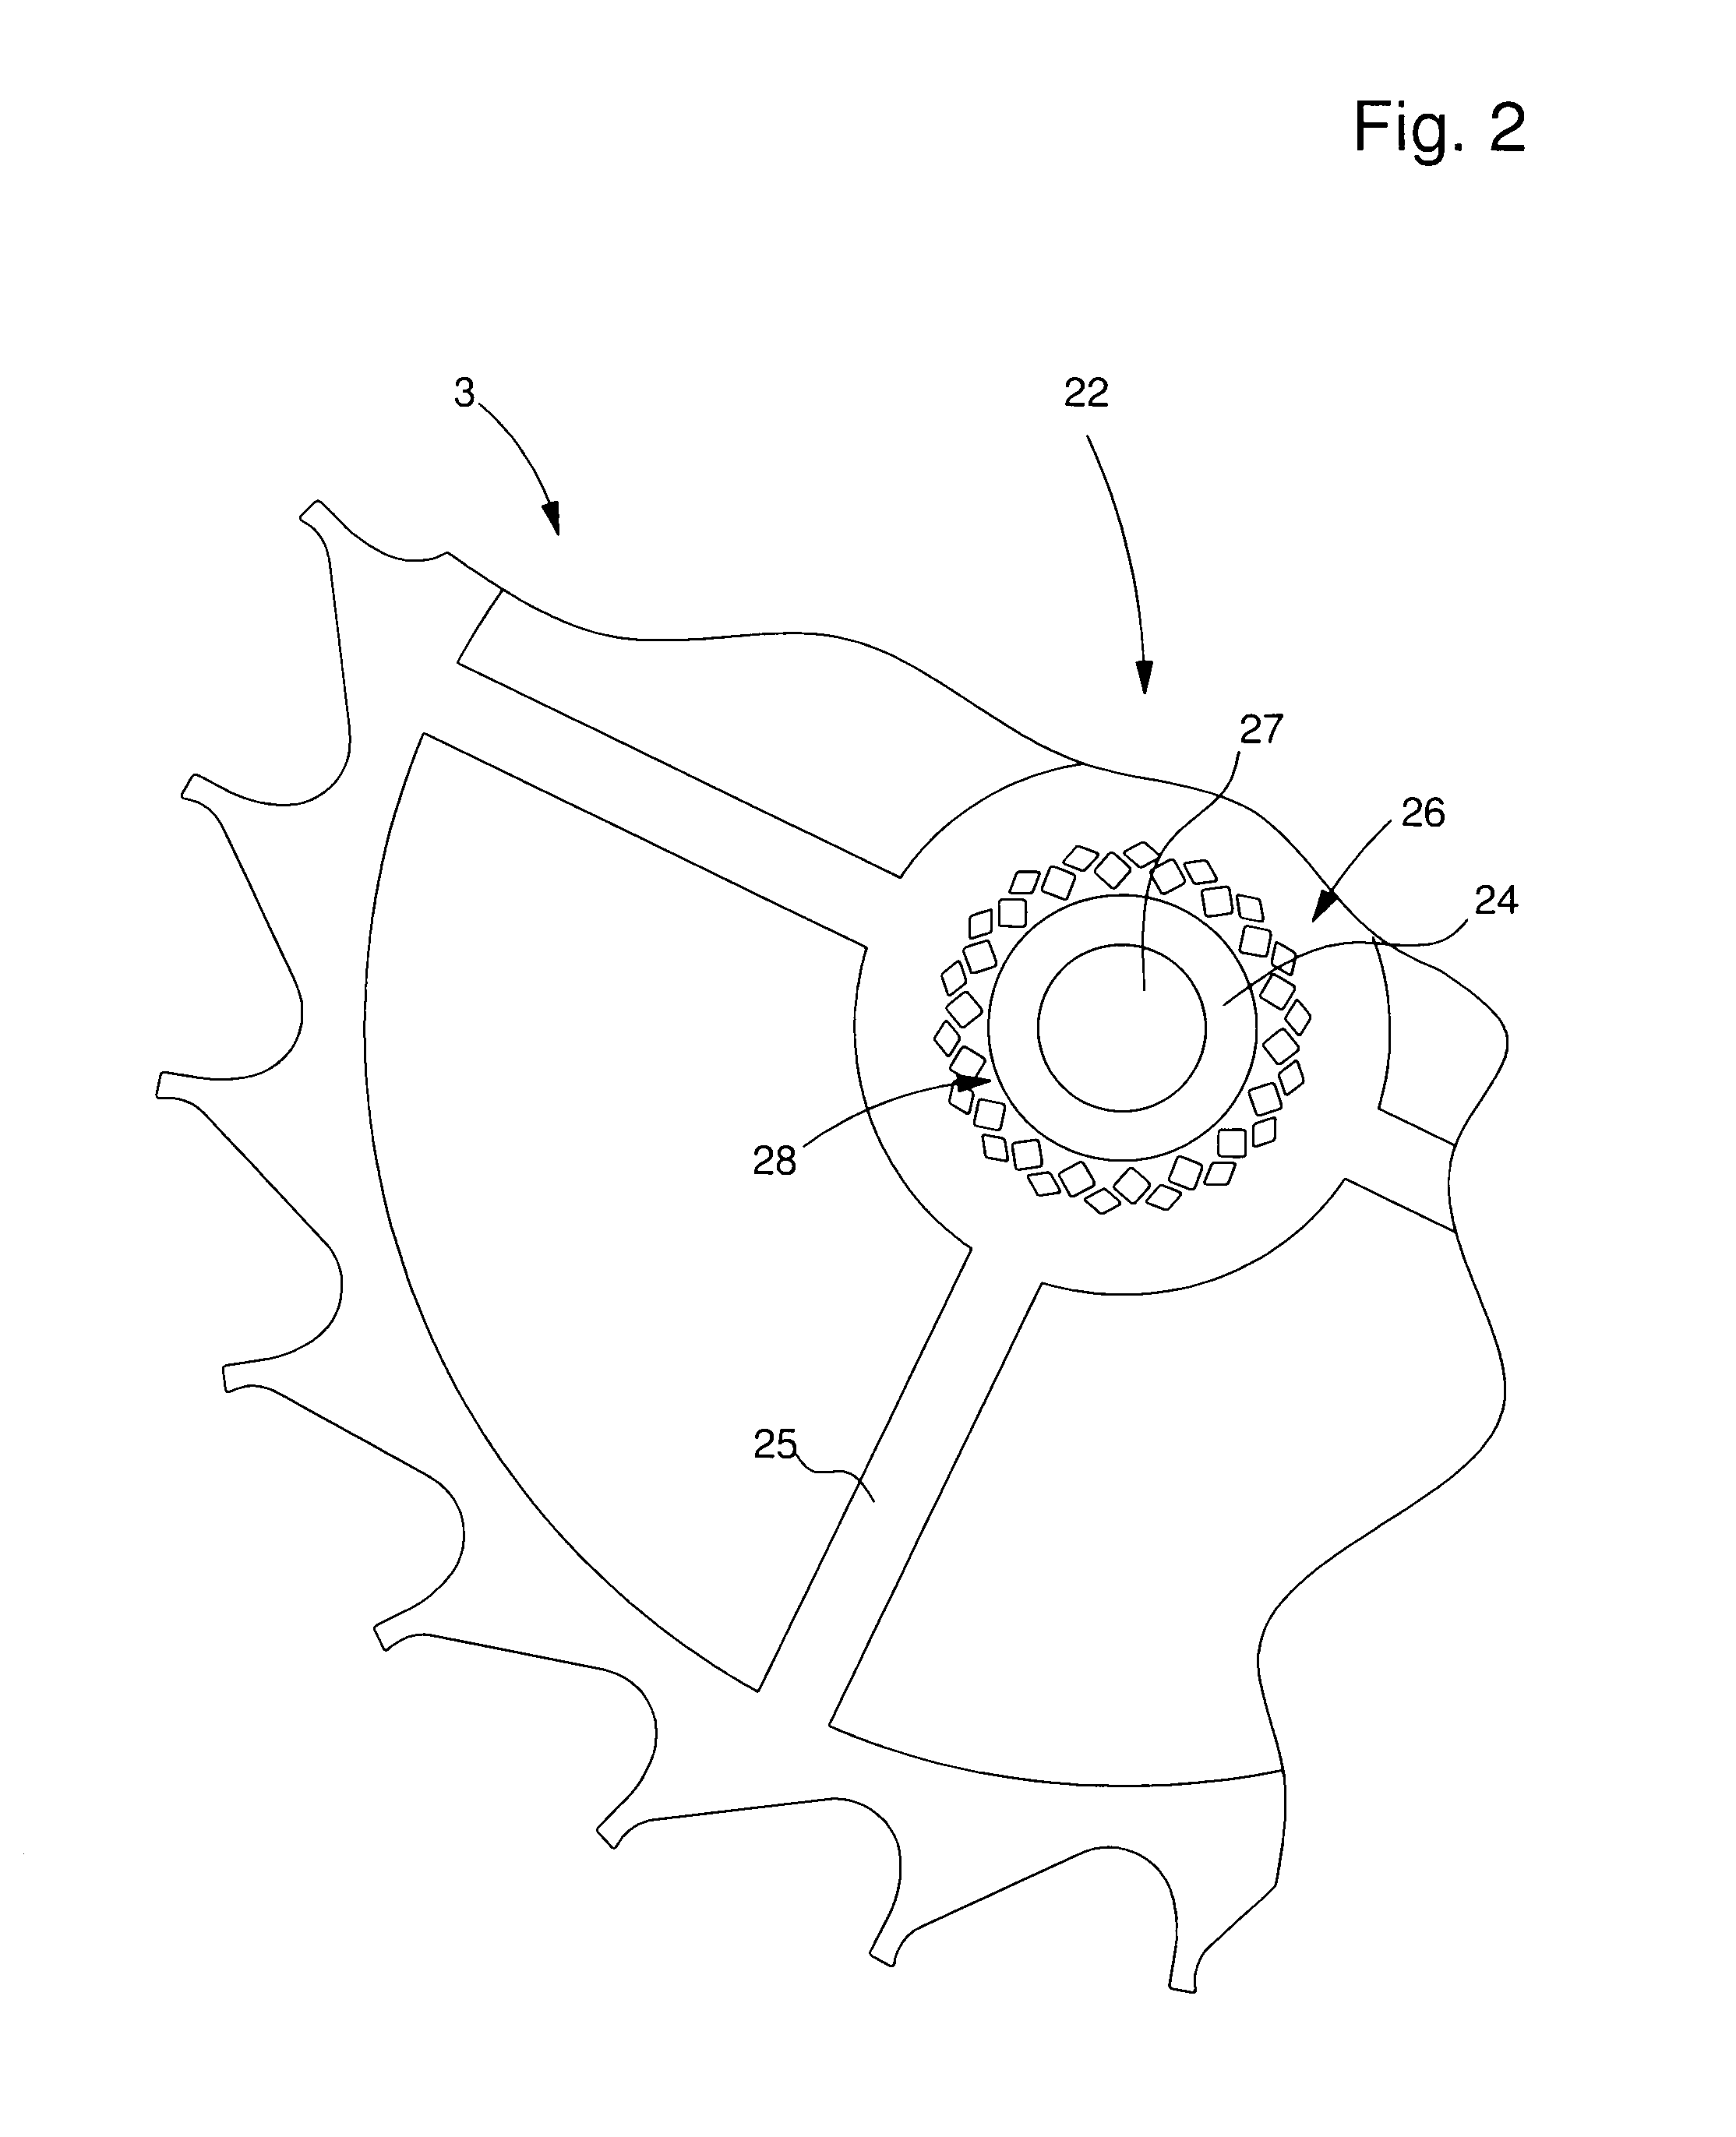 Assembly of a part that has no plastic domain